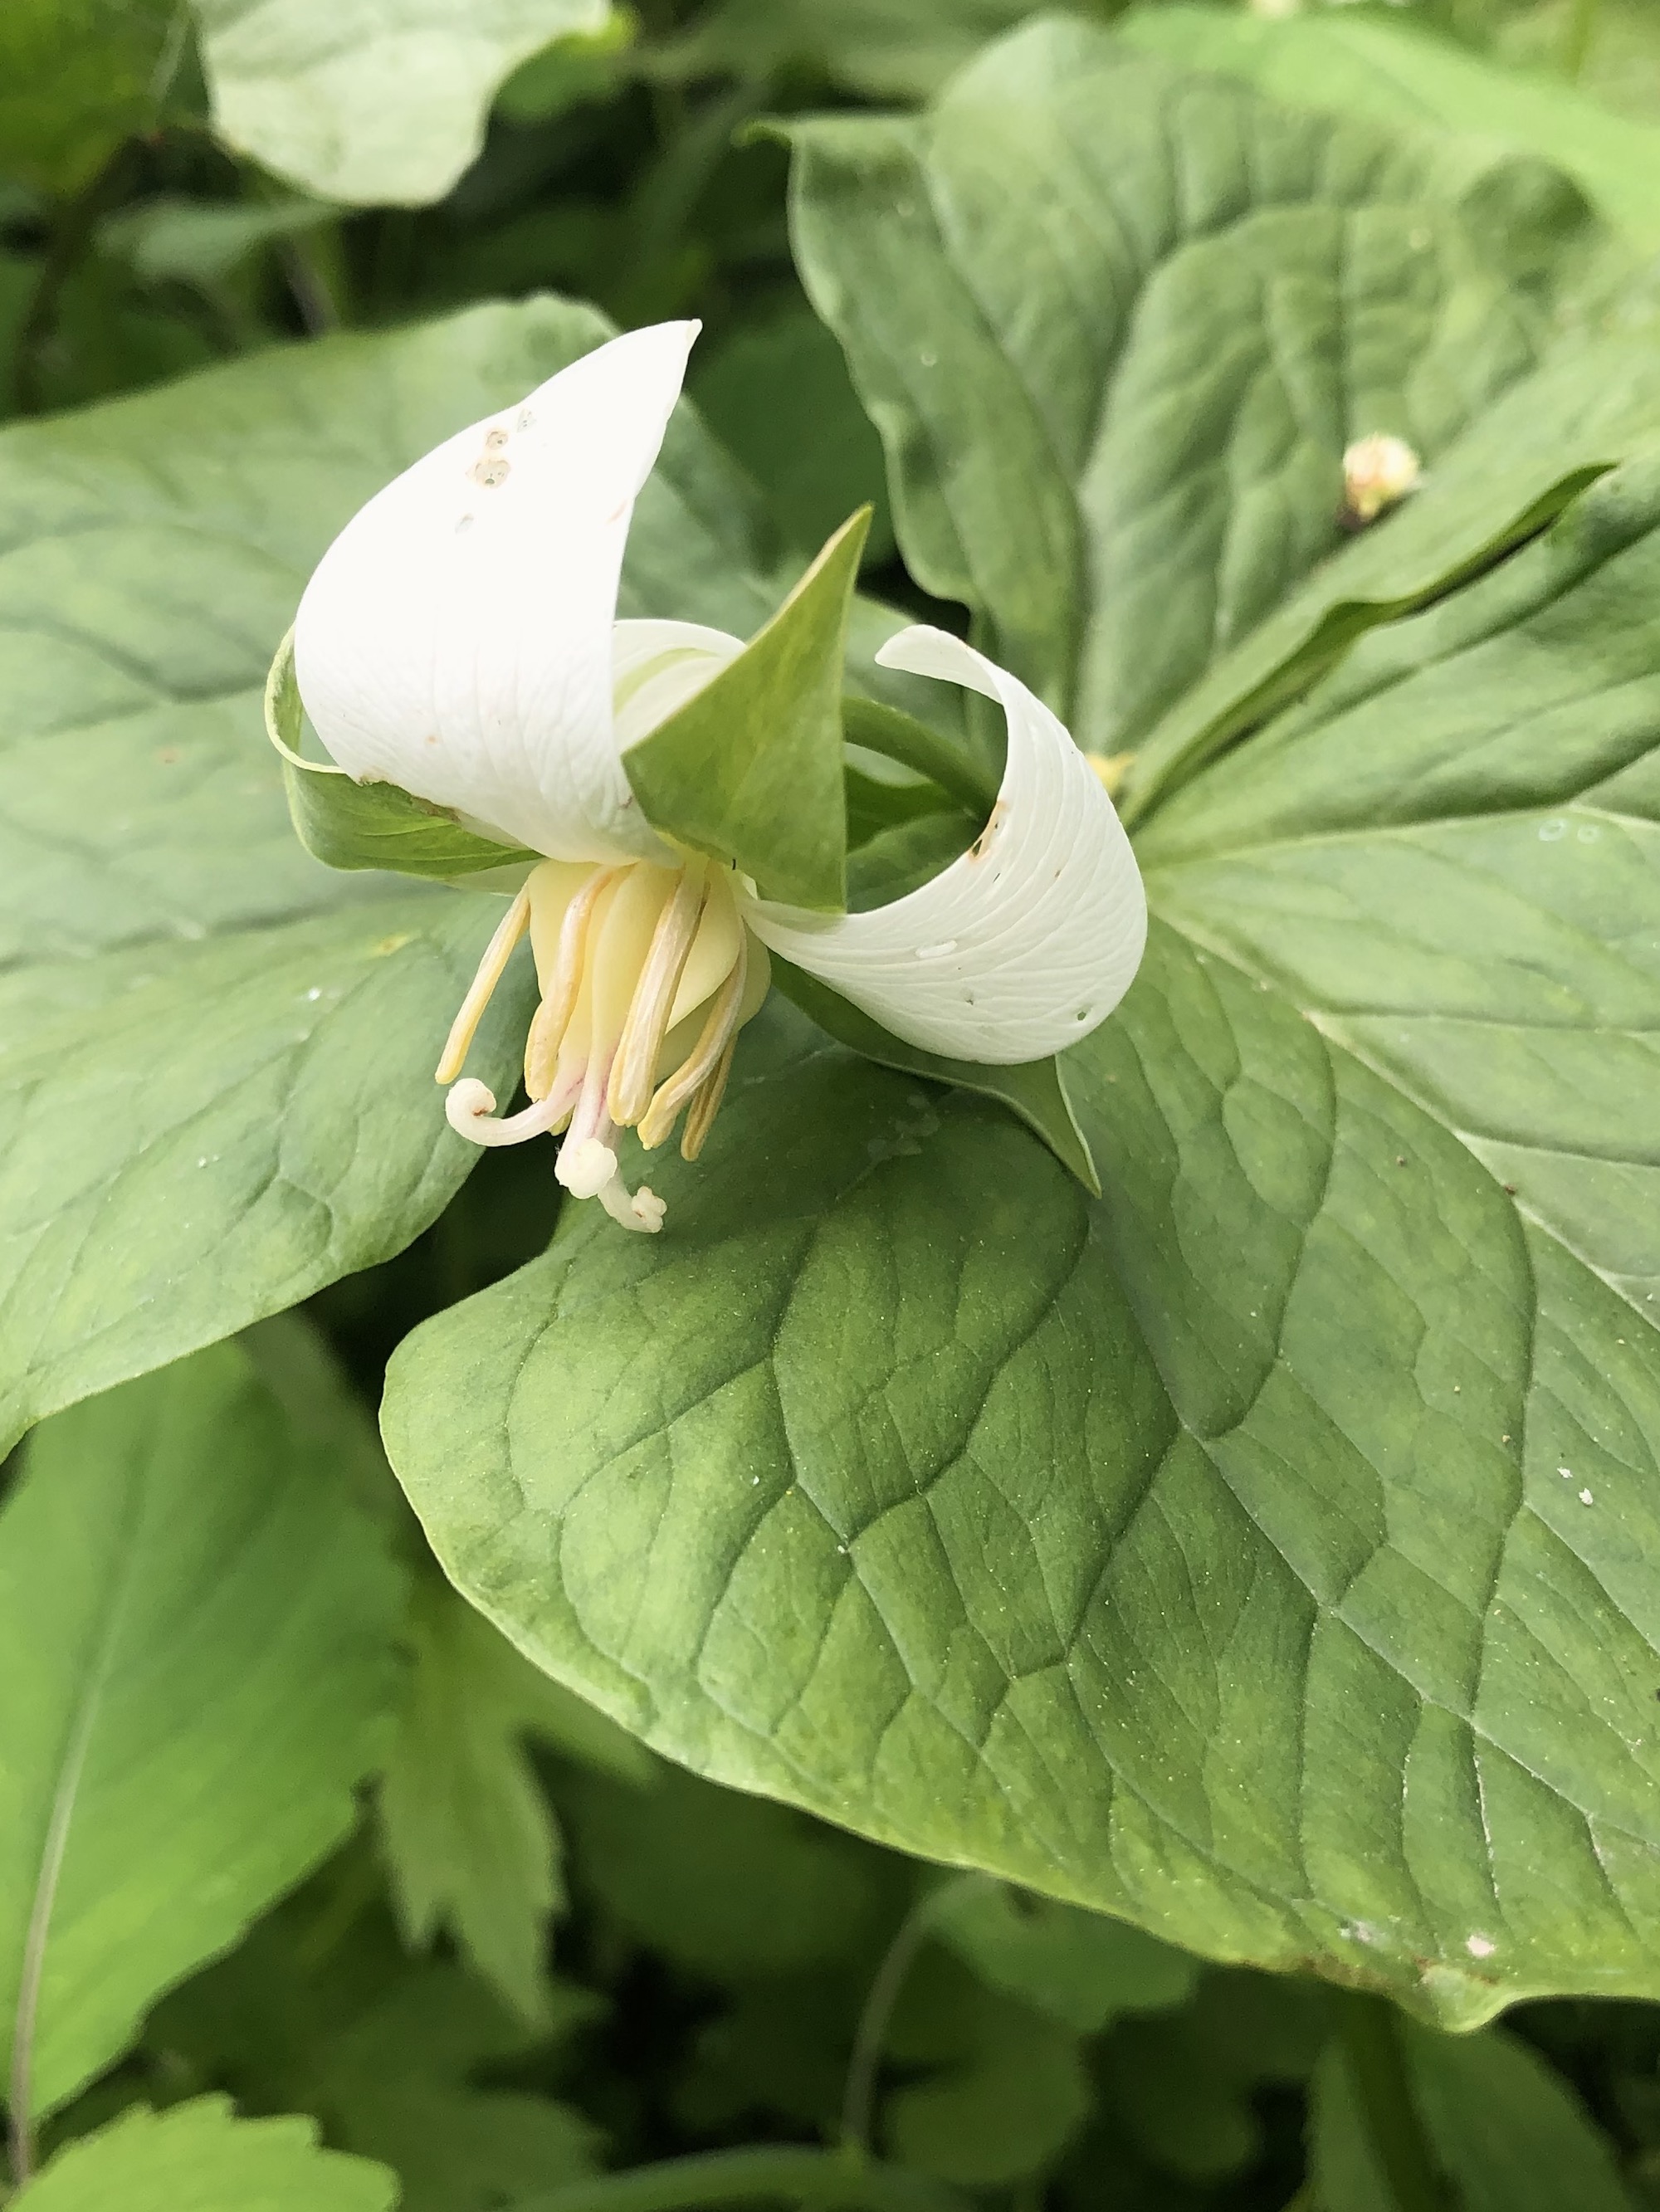 Drooping Trillium near Council Ring Spring in Madison, Wisconsin on May 18, 2021.